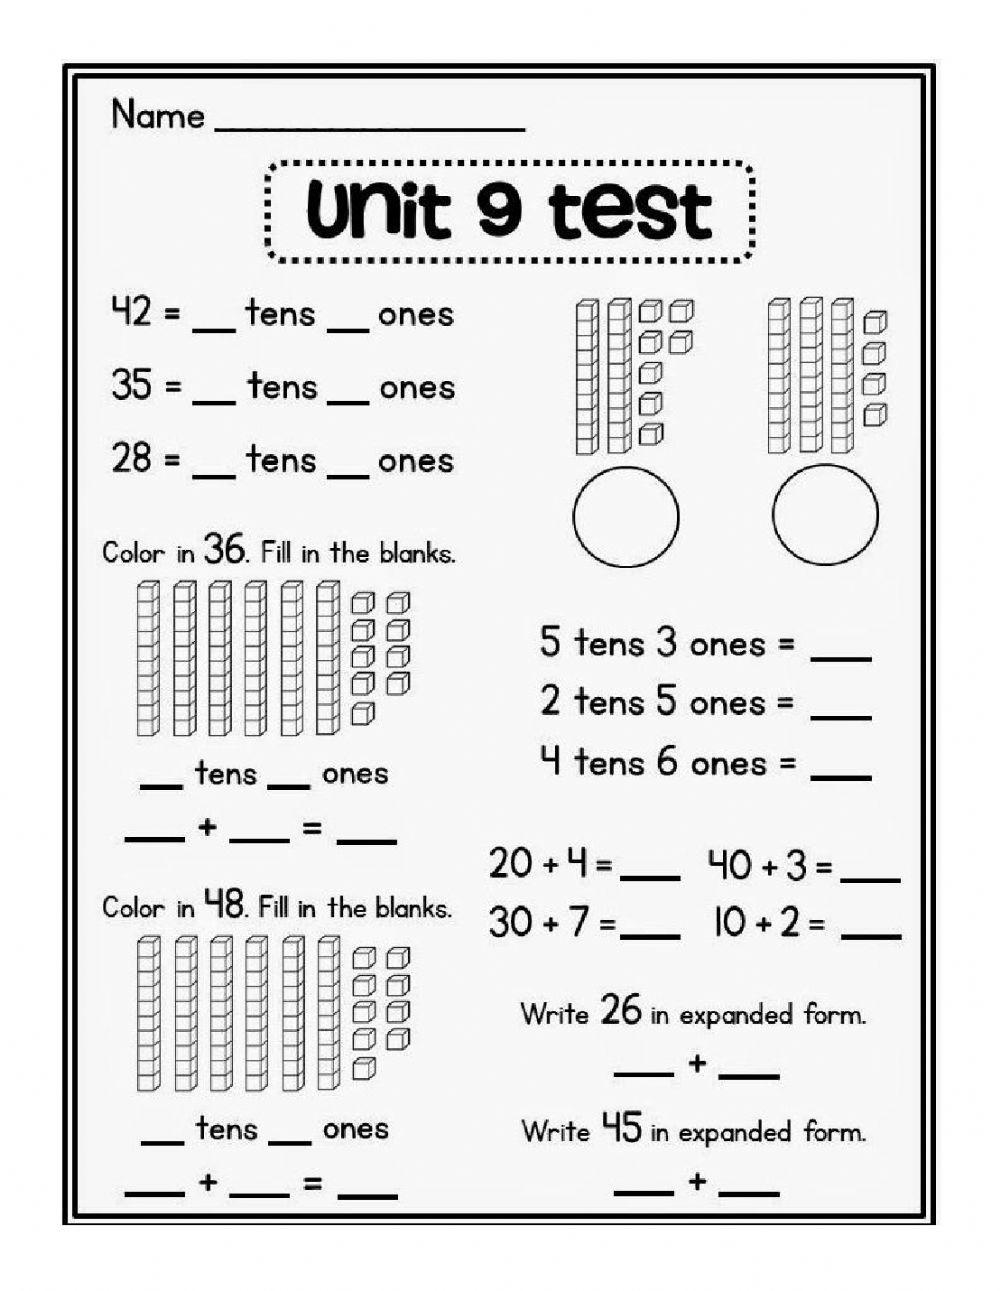 Place Value (Tens and Ones)